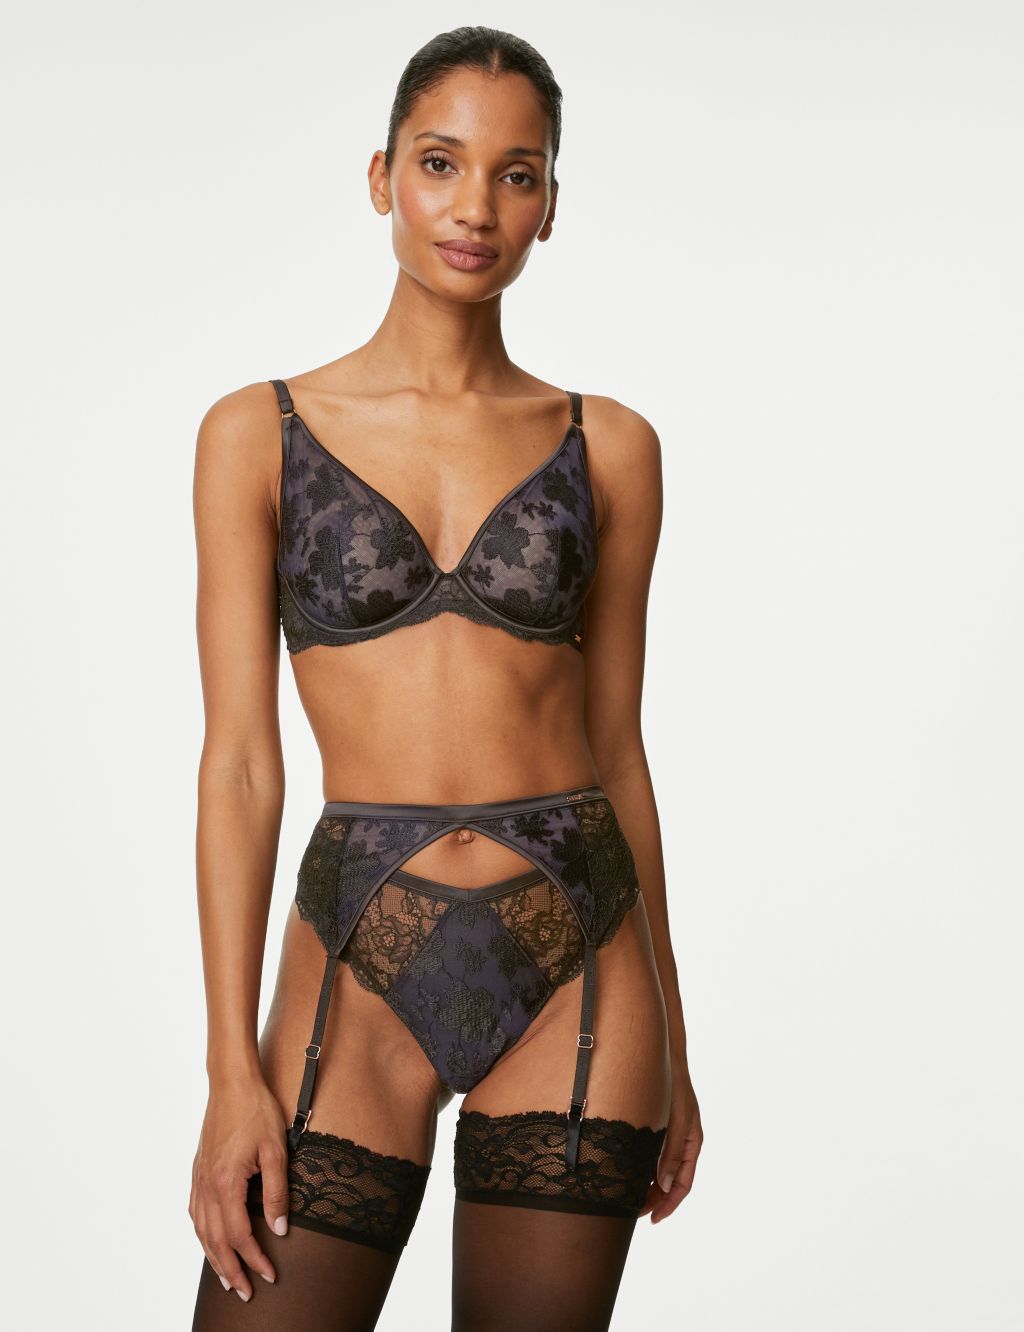 Cosmos Embroidery Wired Plunge Bra Set image 7